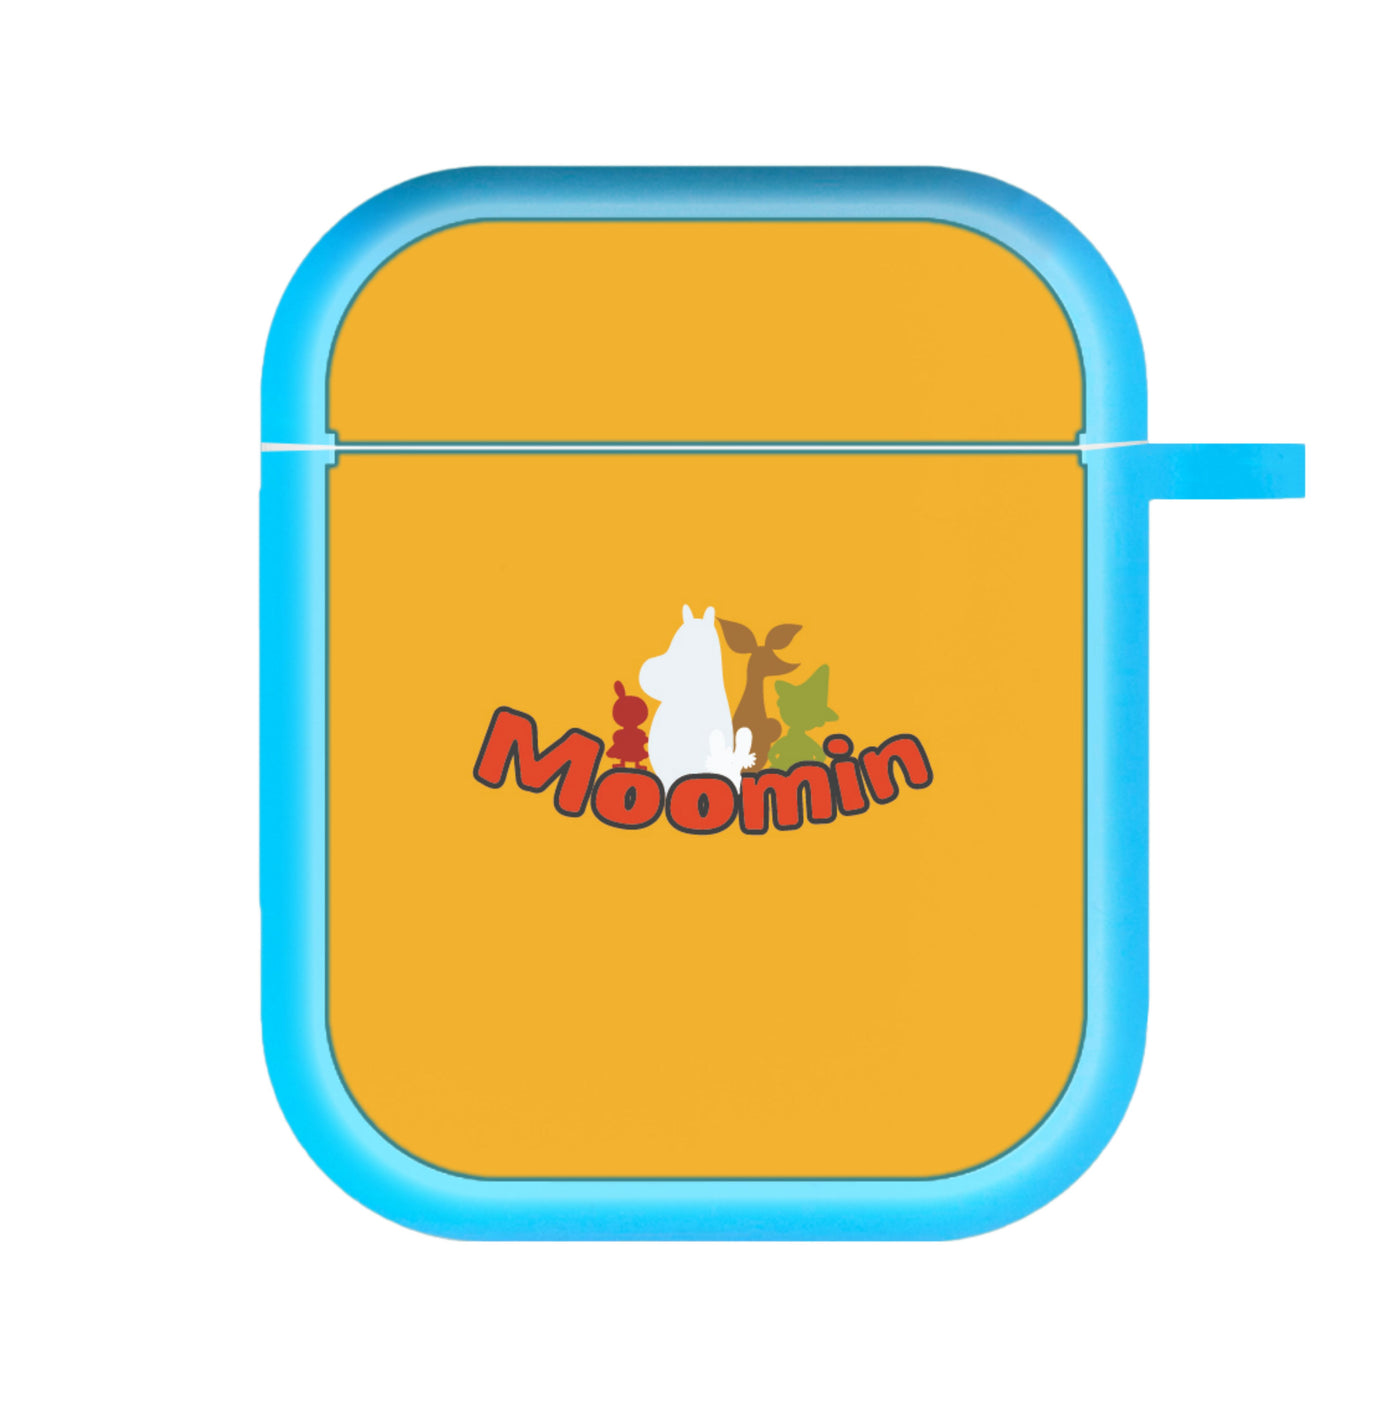 Moomin Text AirPods Case